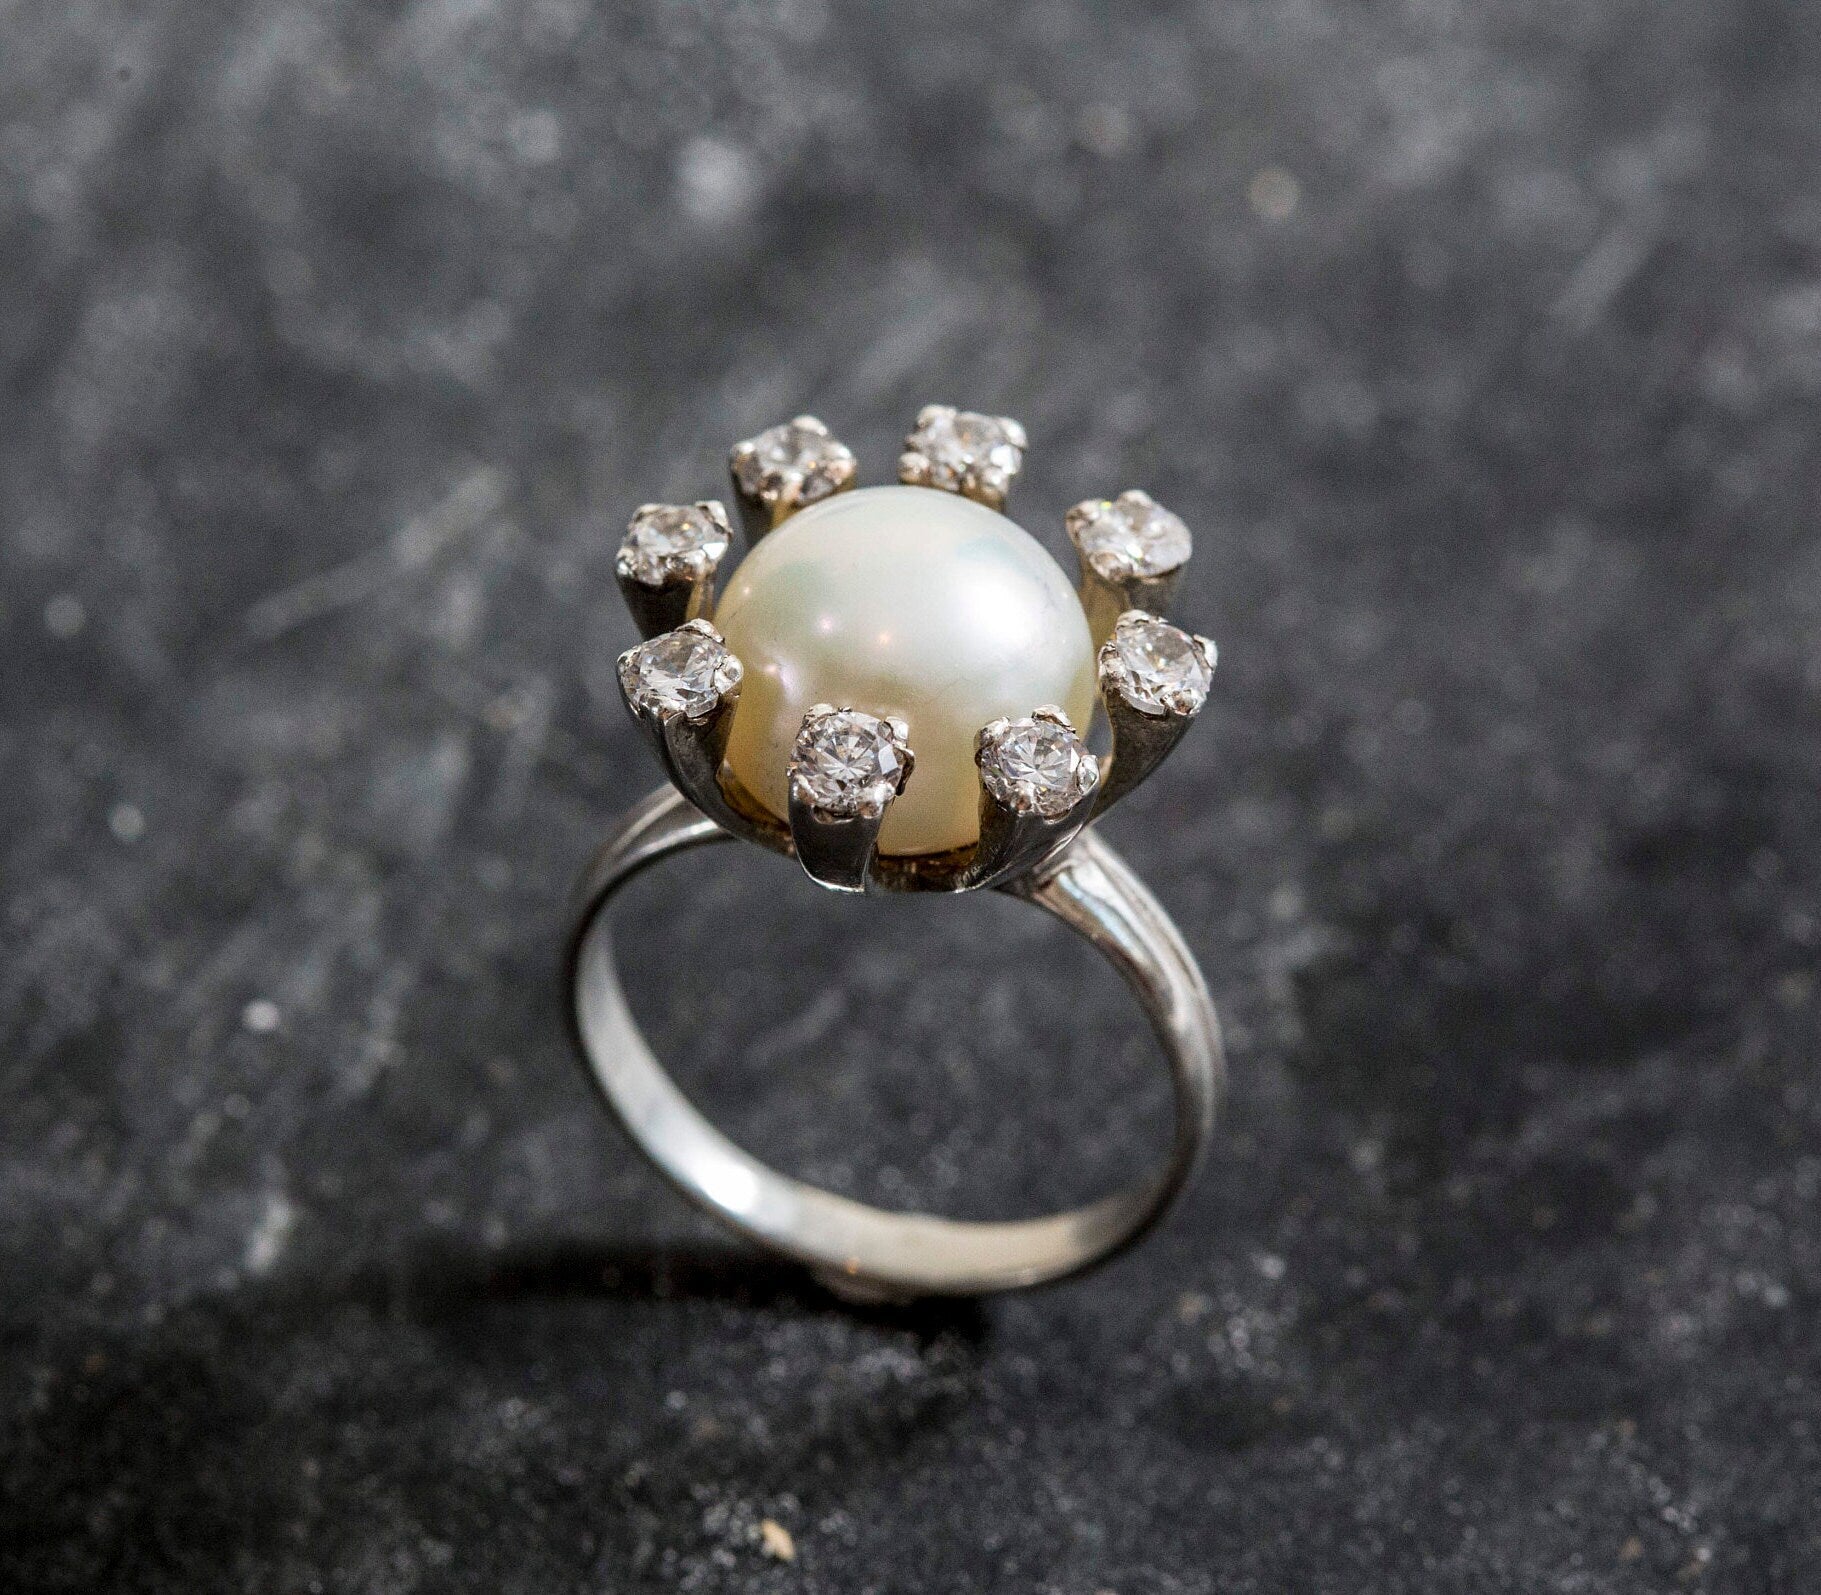 White Pearl Ring, Pearl Ring, Natural Pearl, June Birthstone, Vintage Pearl Ring, White Ring, Statement Ring, June Ring, Solid Silver Ring